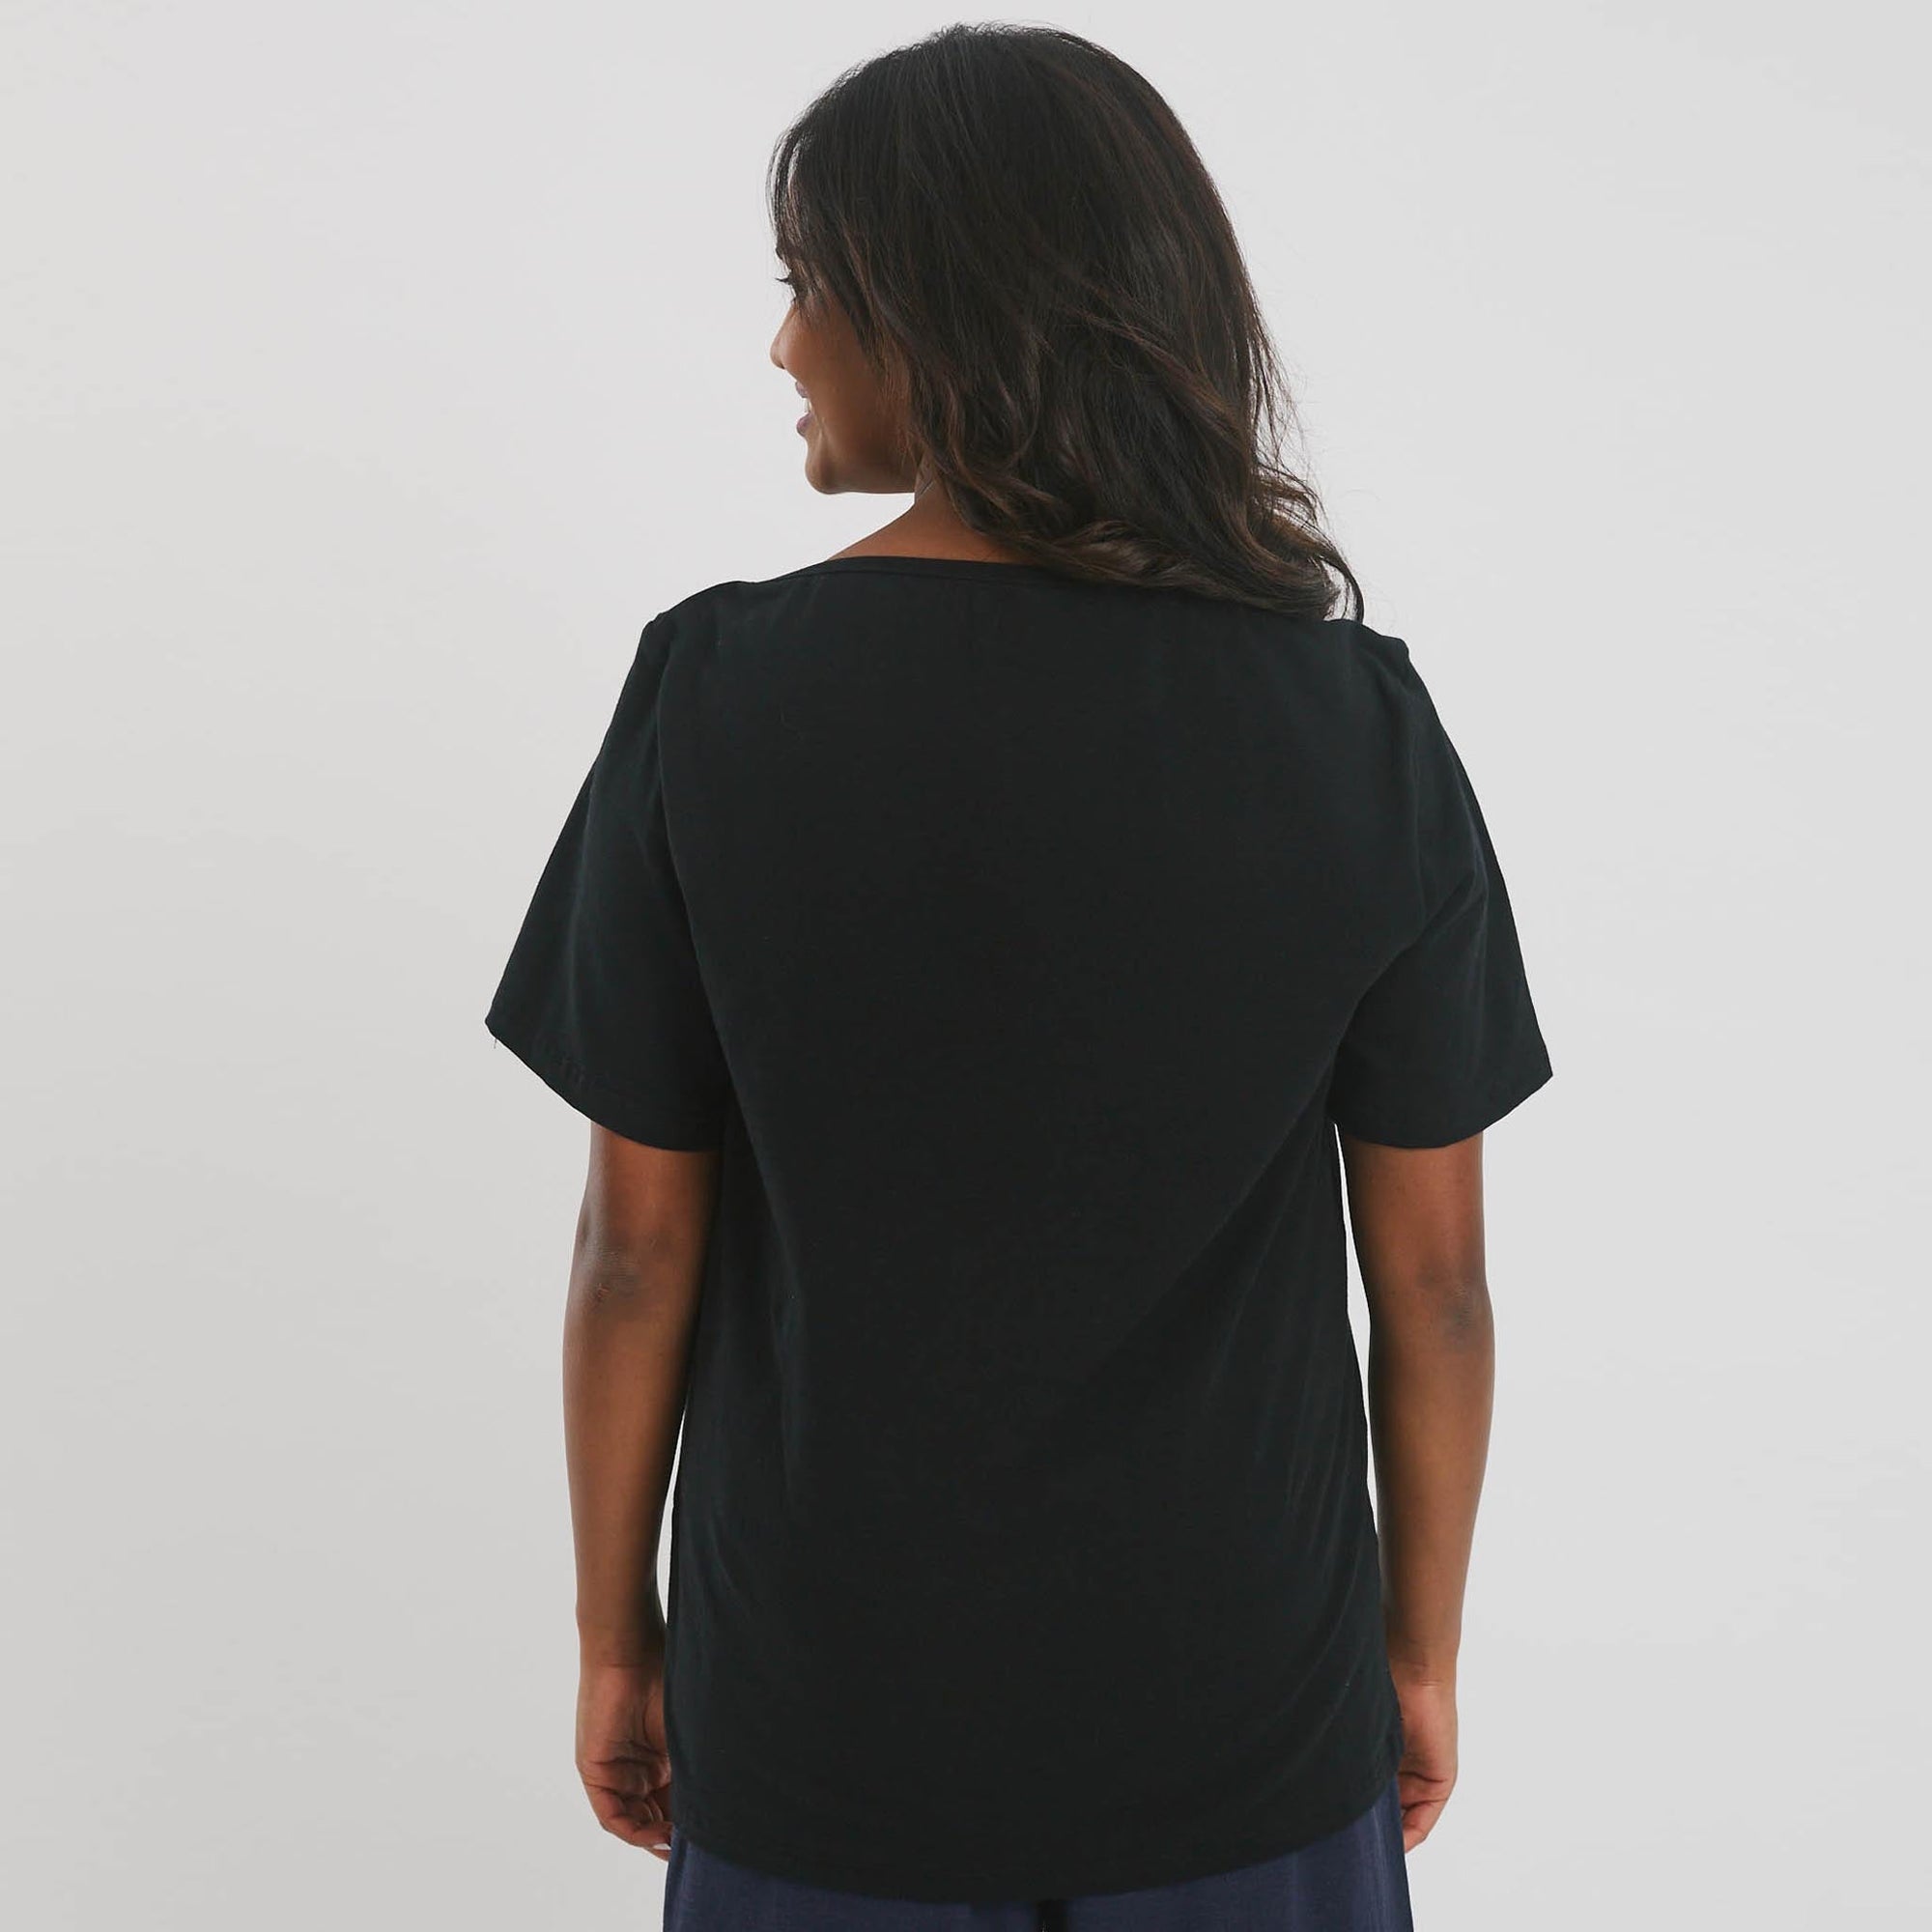 The Boat Neck Short Sleeve Top Shirts &amp; Tops - The Shapes United